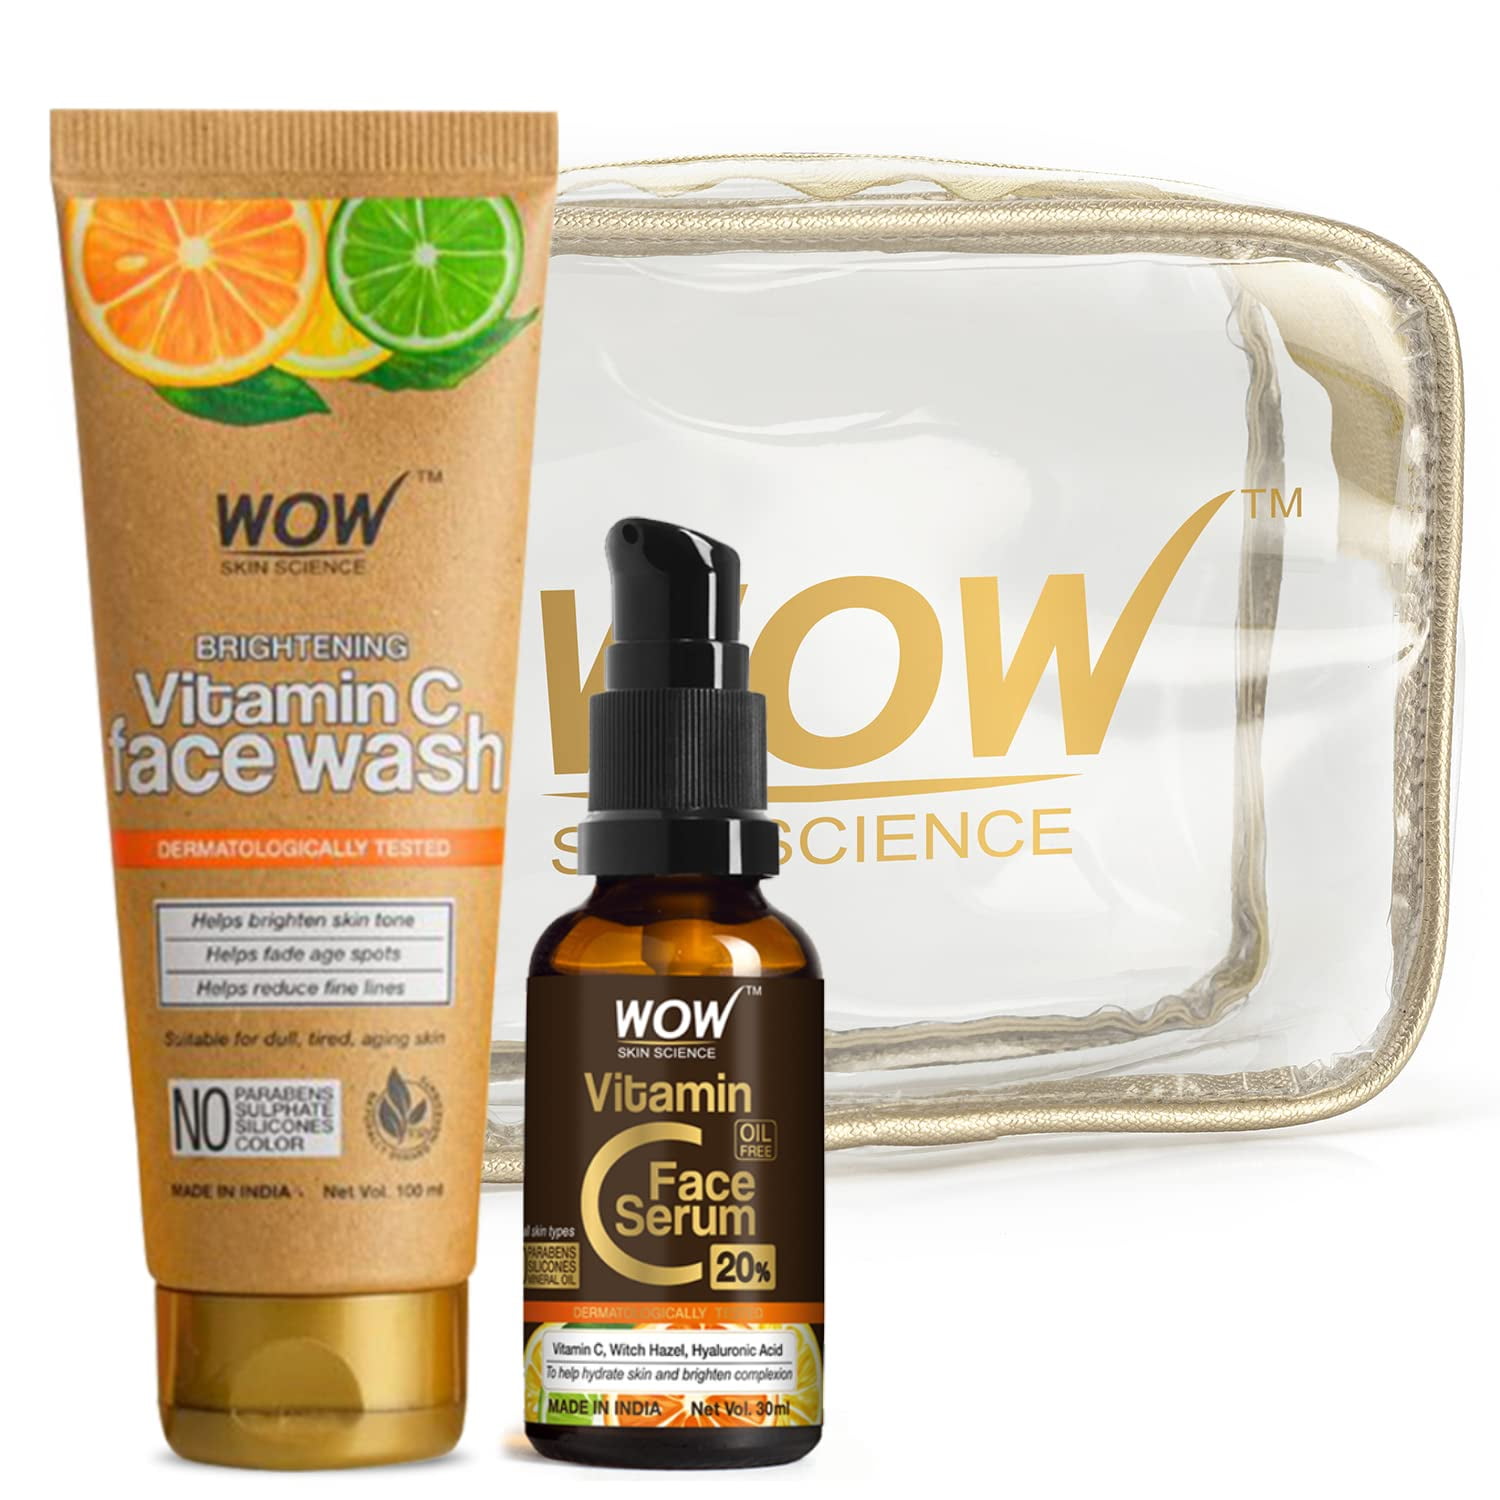 WOW Skin Science Vitamin C Face Wash In Paper Tube (Eco Friendly Packaging) with Vitamin C Face Serum Kit - No Parabens, Sulphate, Silicones - Net Vol -